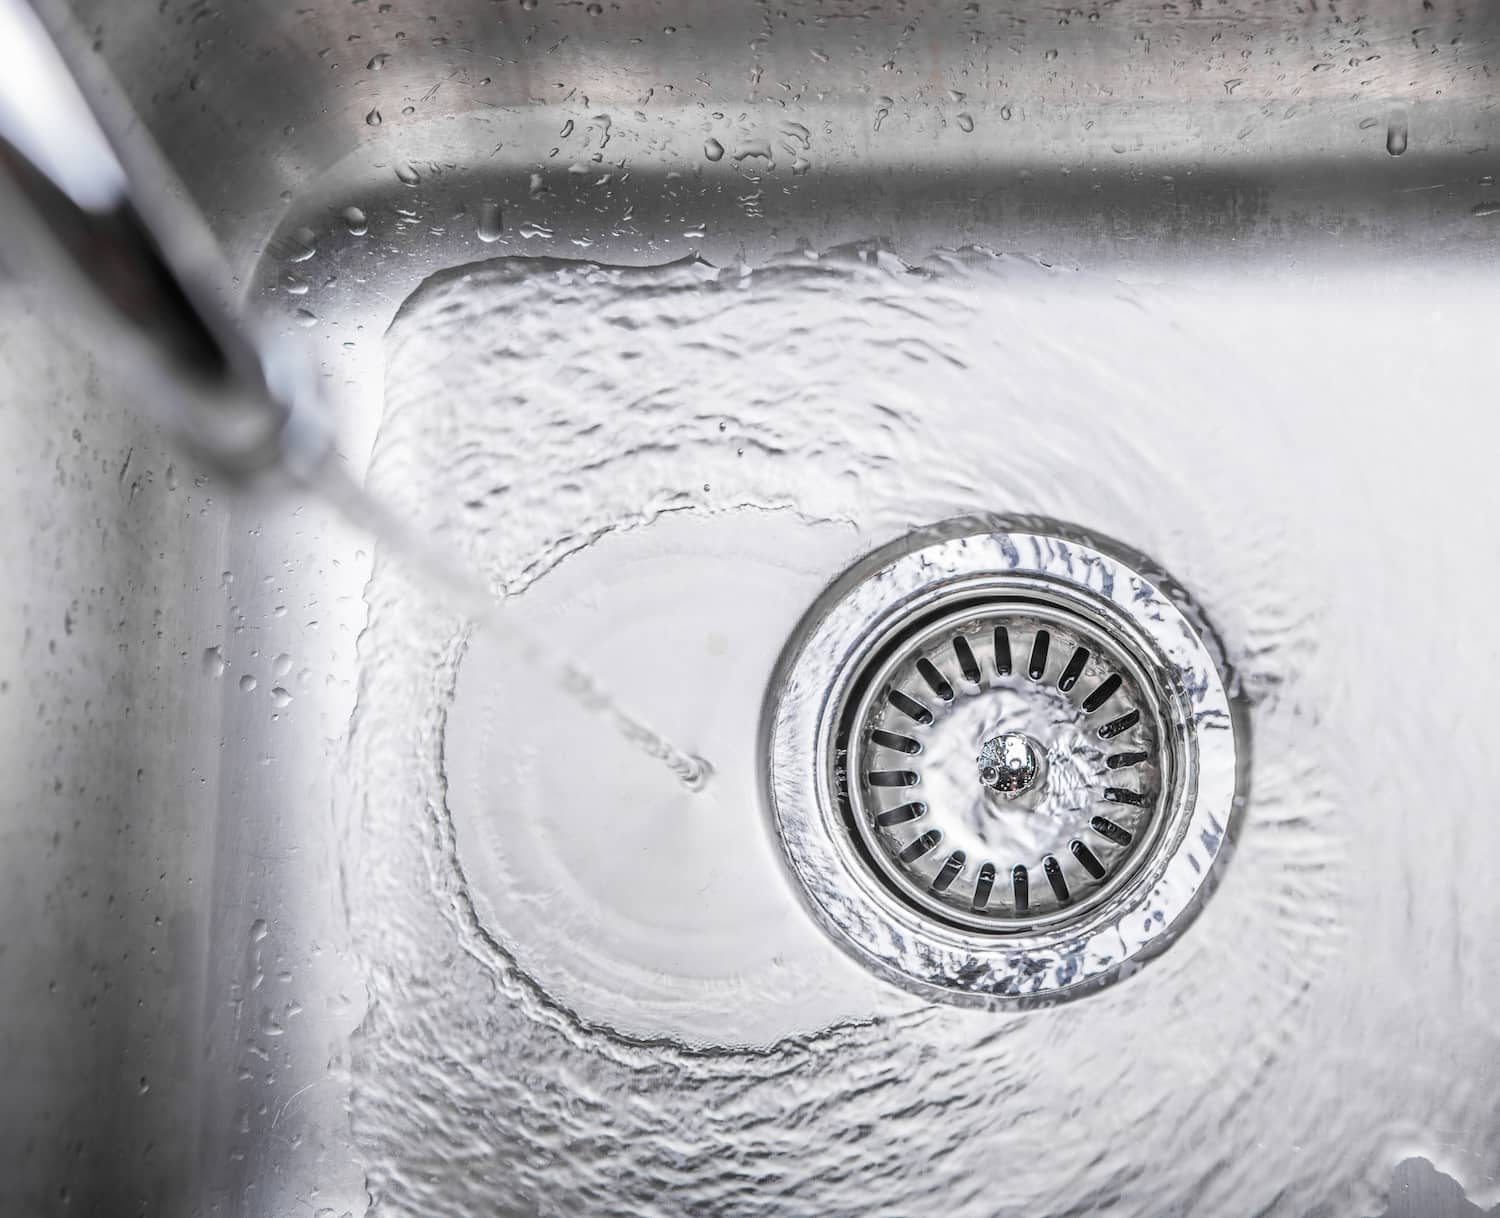 Keeping a stainless steel sink clean requires some regular maintenance but is generally simple